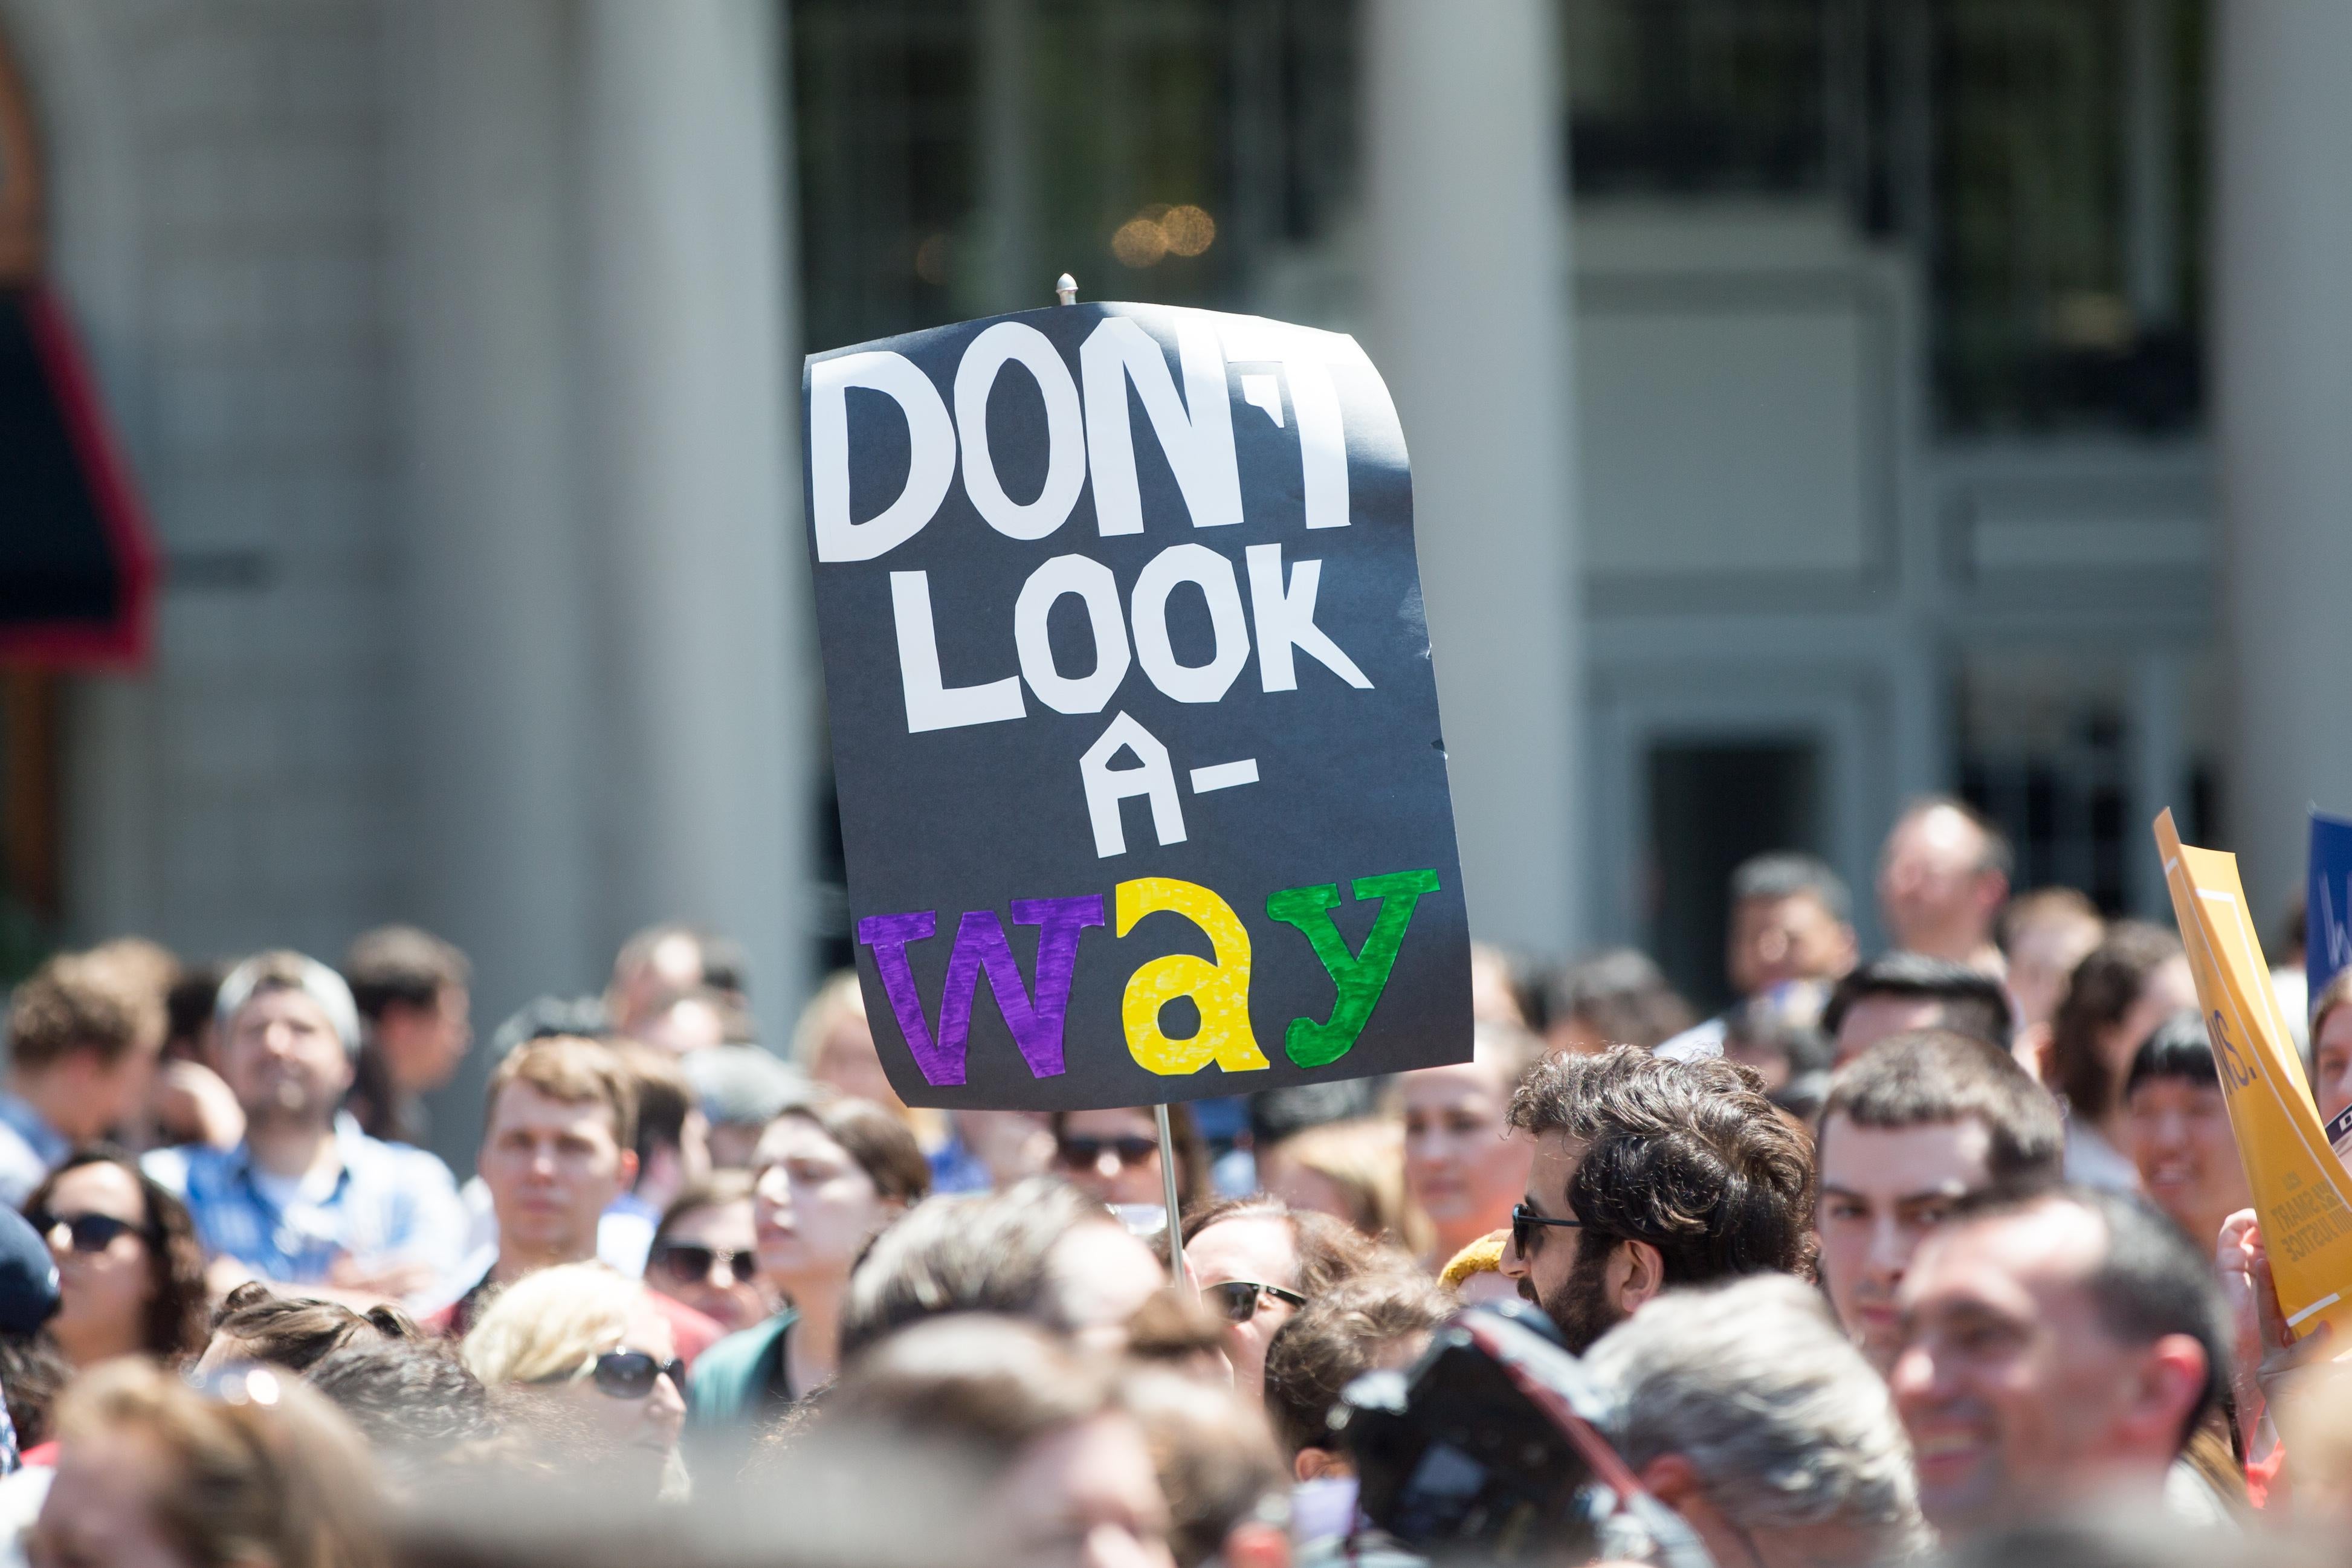 A protestor holds a handmade "Don't Look Away" sign in Copley Square in Boston.